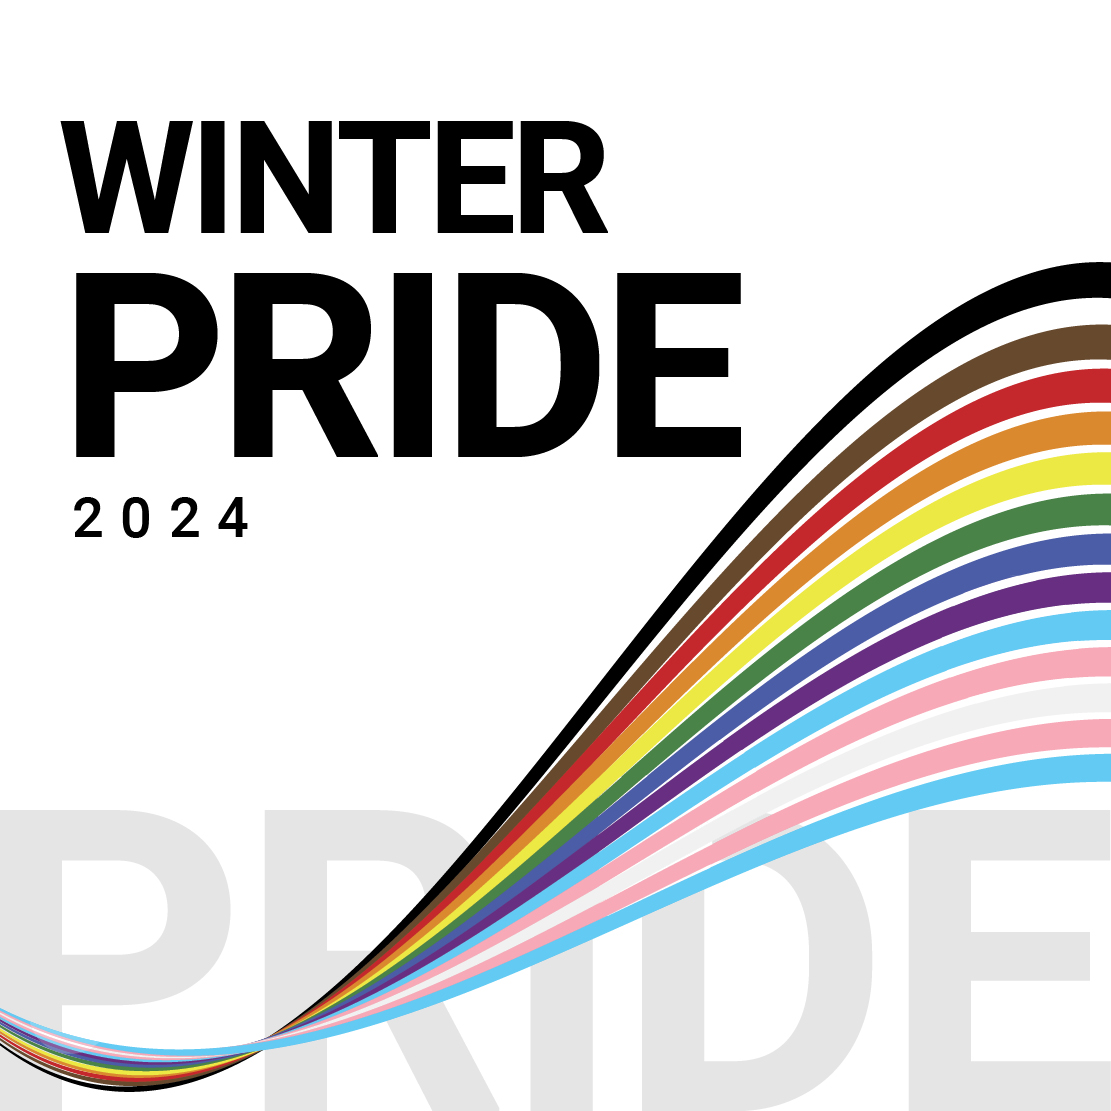 Text on graphic reads "Winter Pride 2024" with an image of the pride flag in an arch format on a white background.